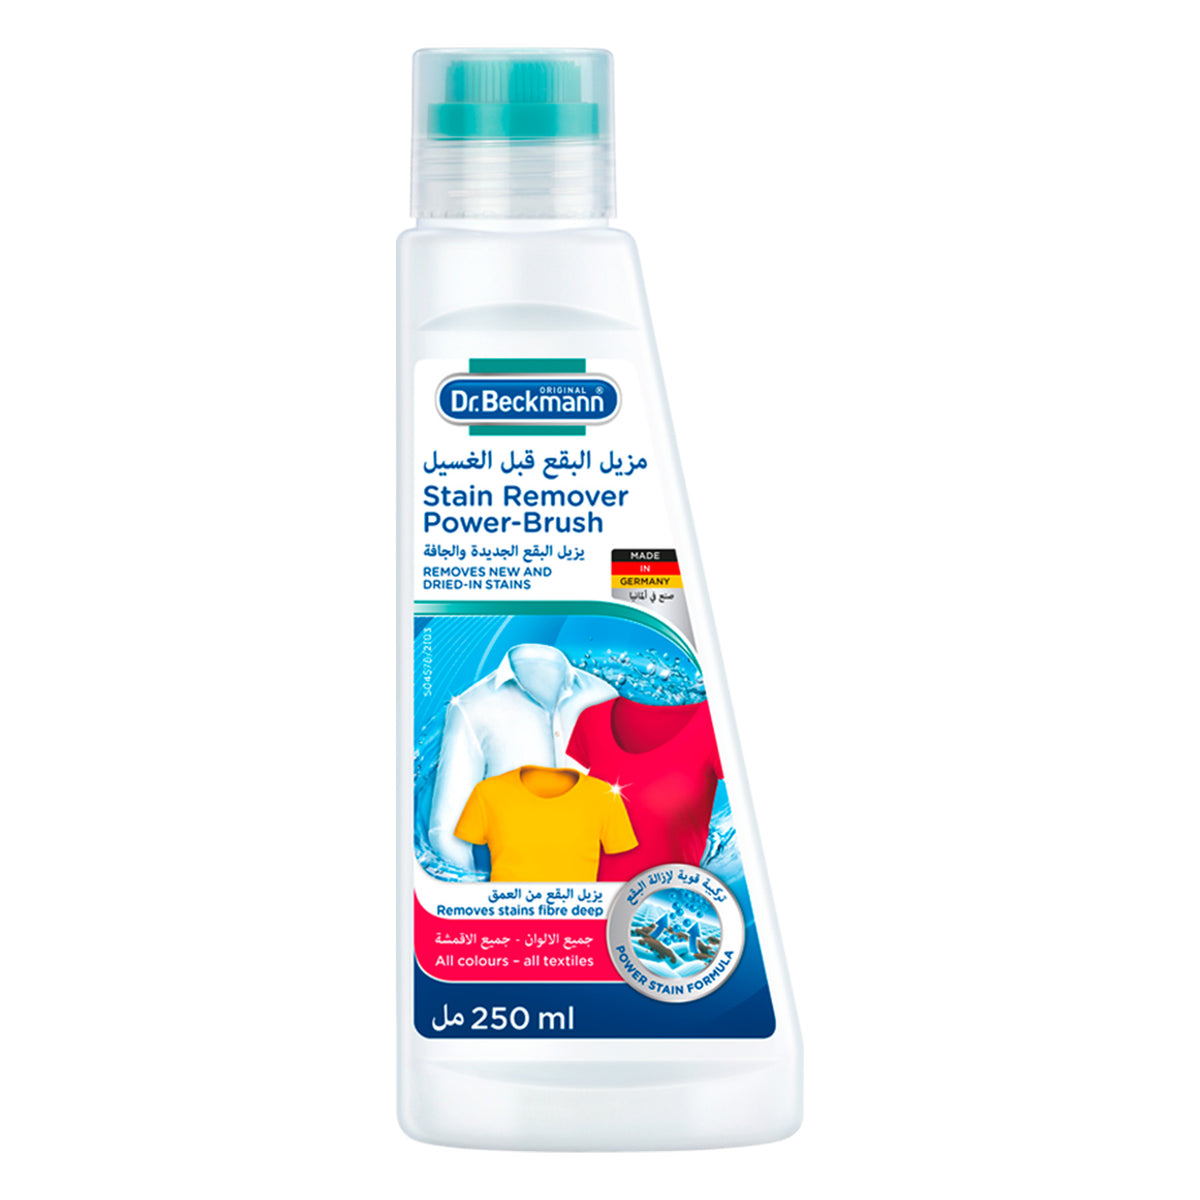 Stain remover before washingCapacity: 250 ml